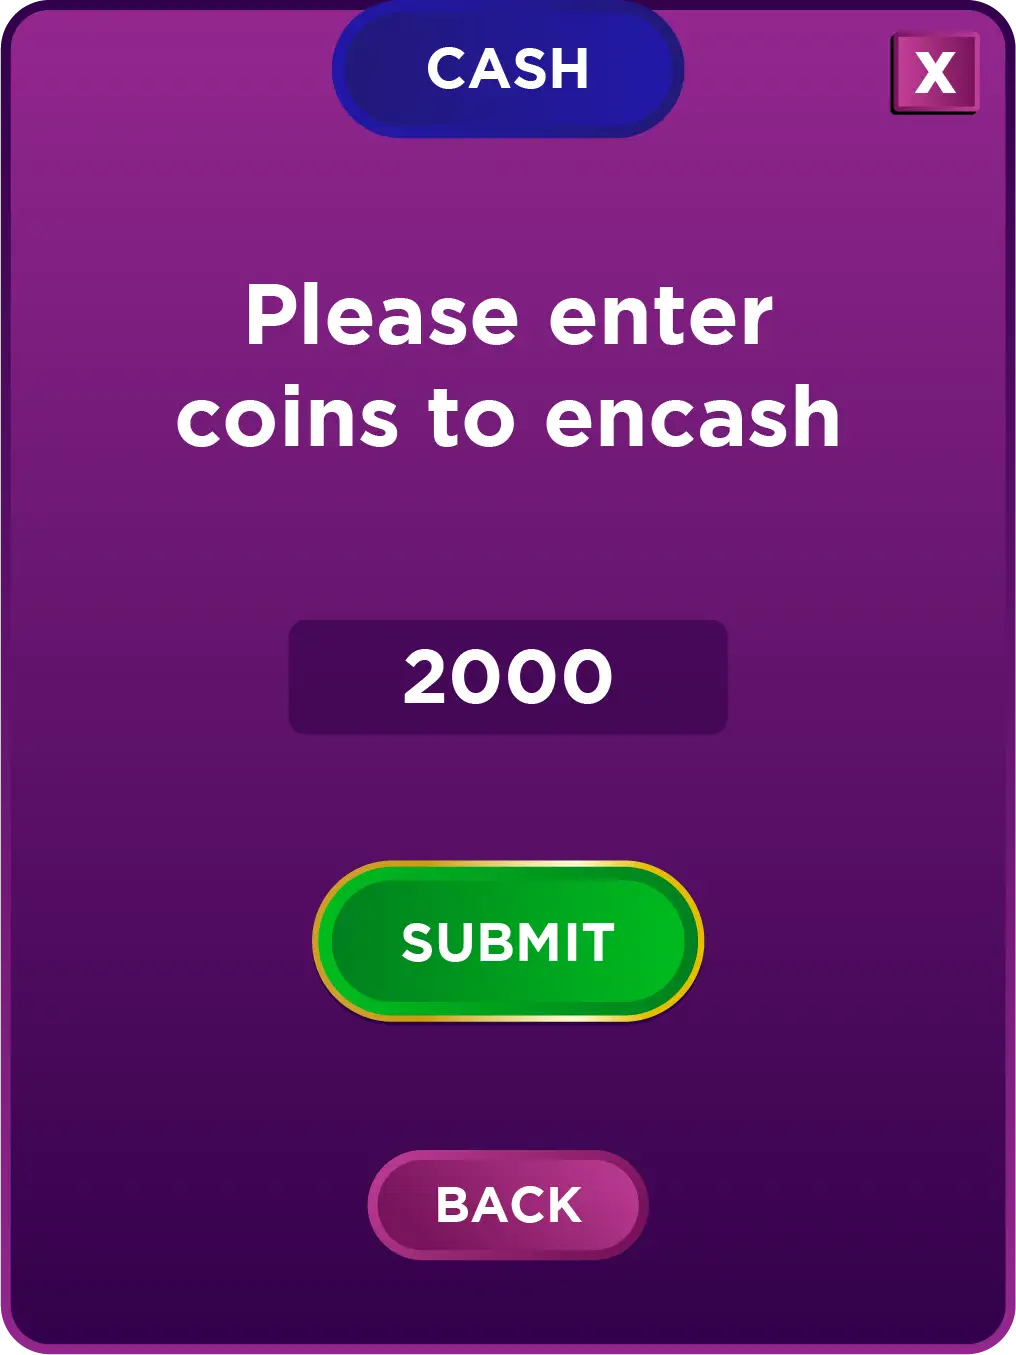 cash-coins-screen-1.png